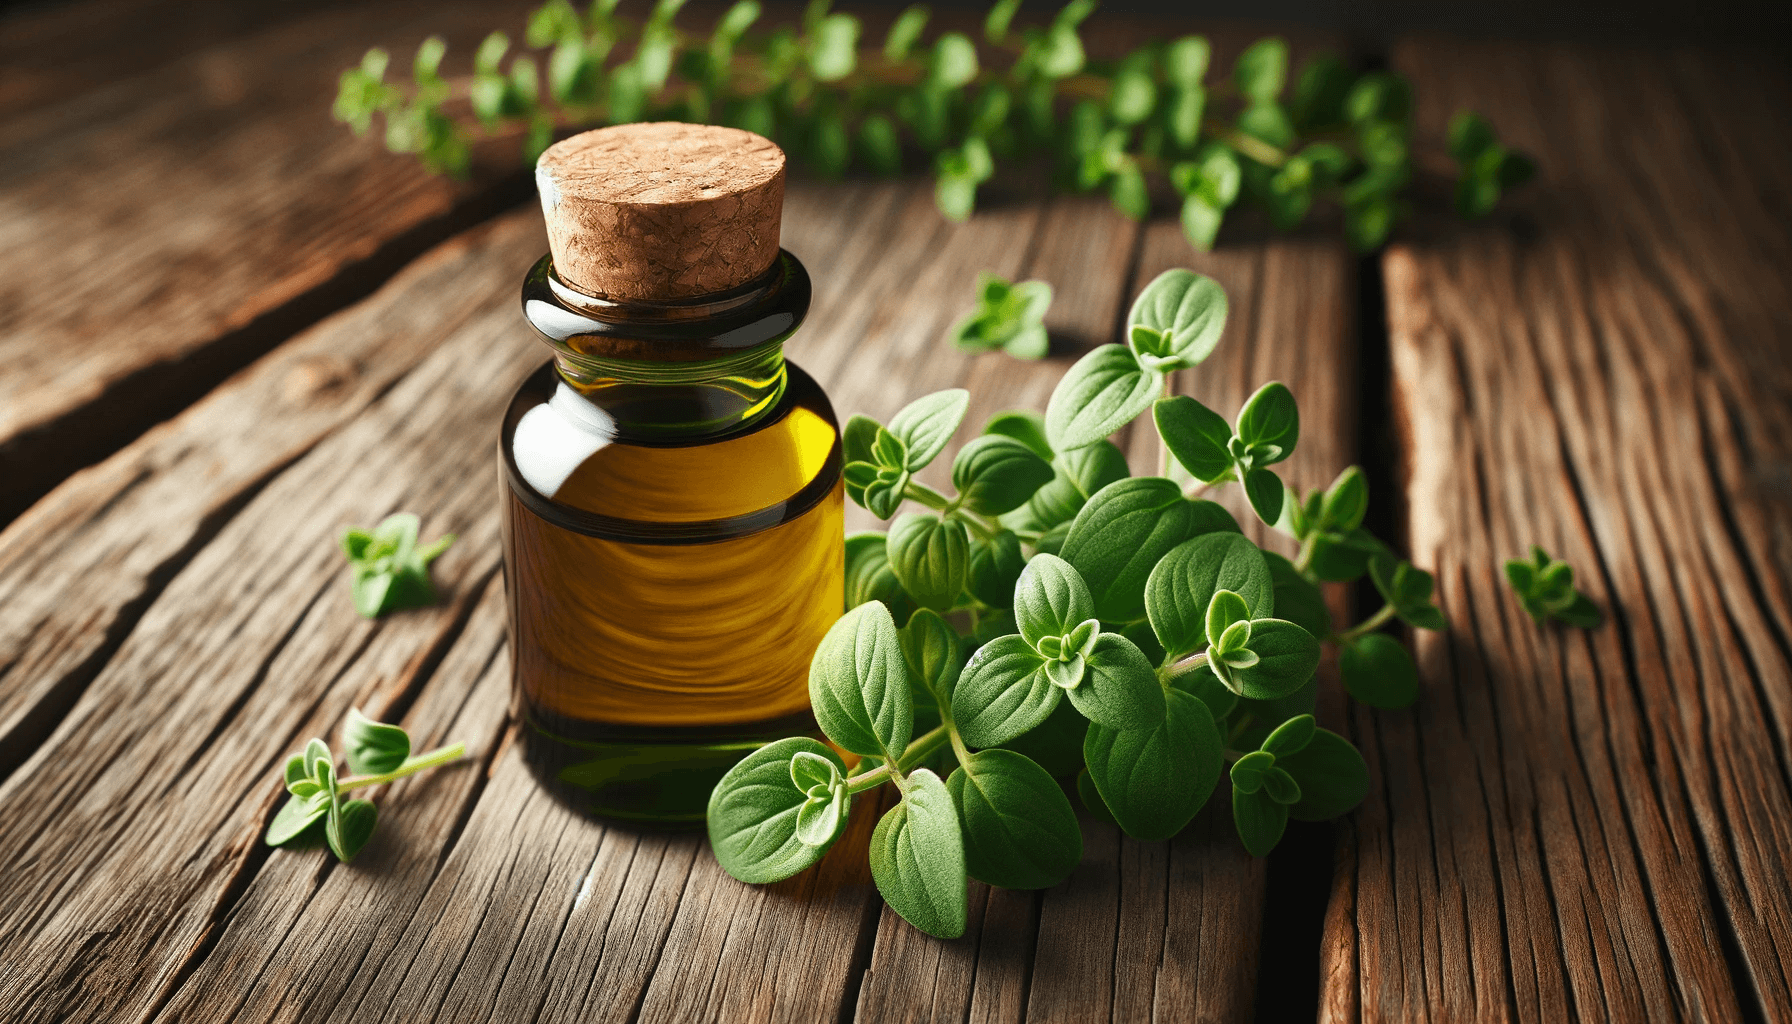 A bottle of oregano oil next to a bunch of fresh oregano leaves on a rustic wooden table.